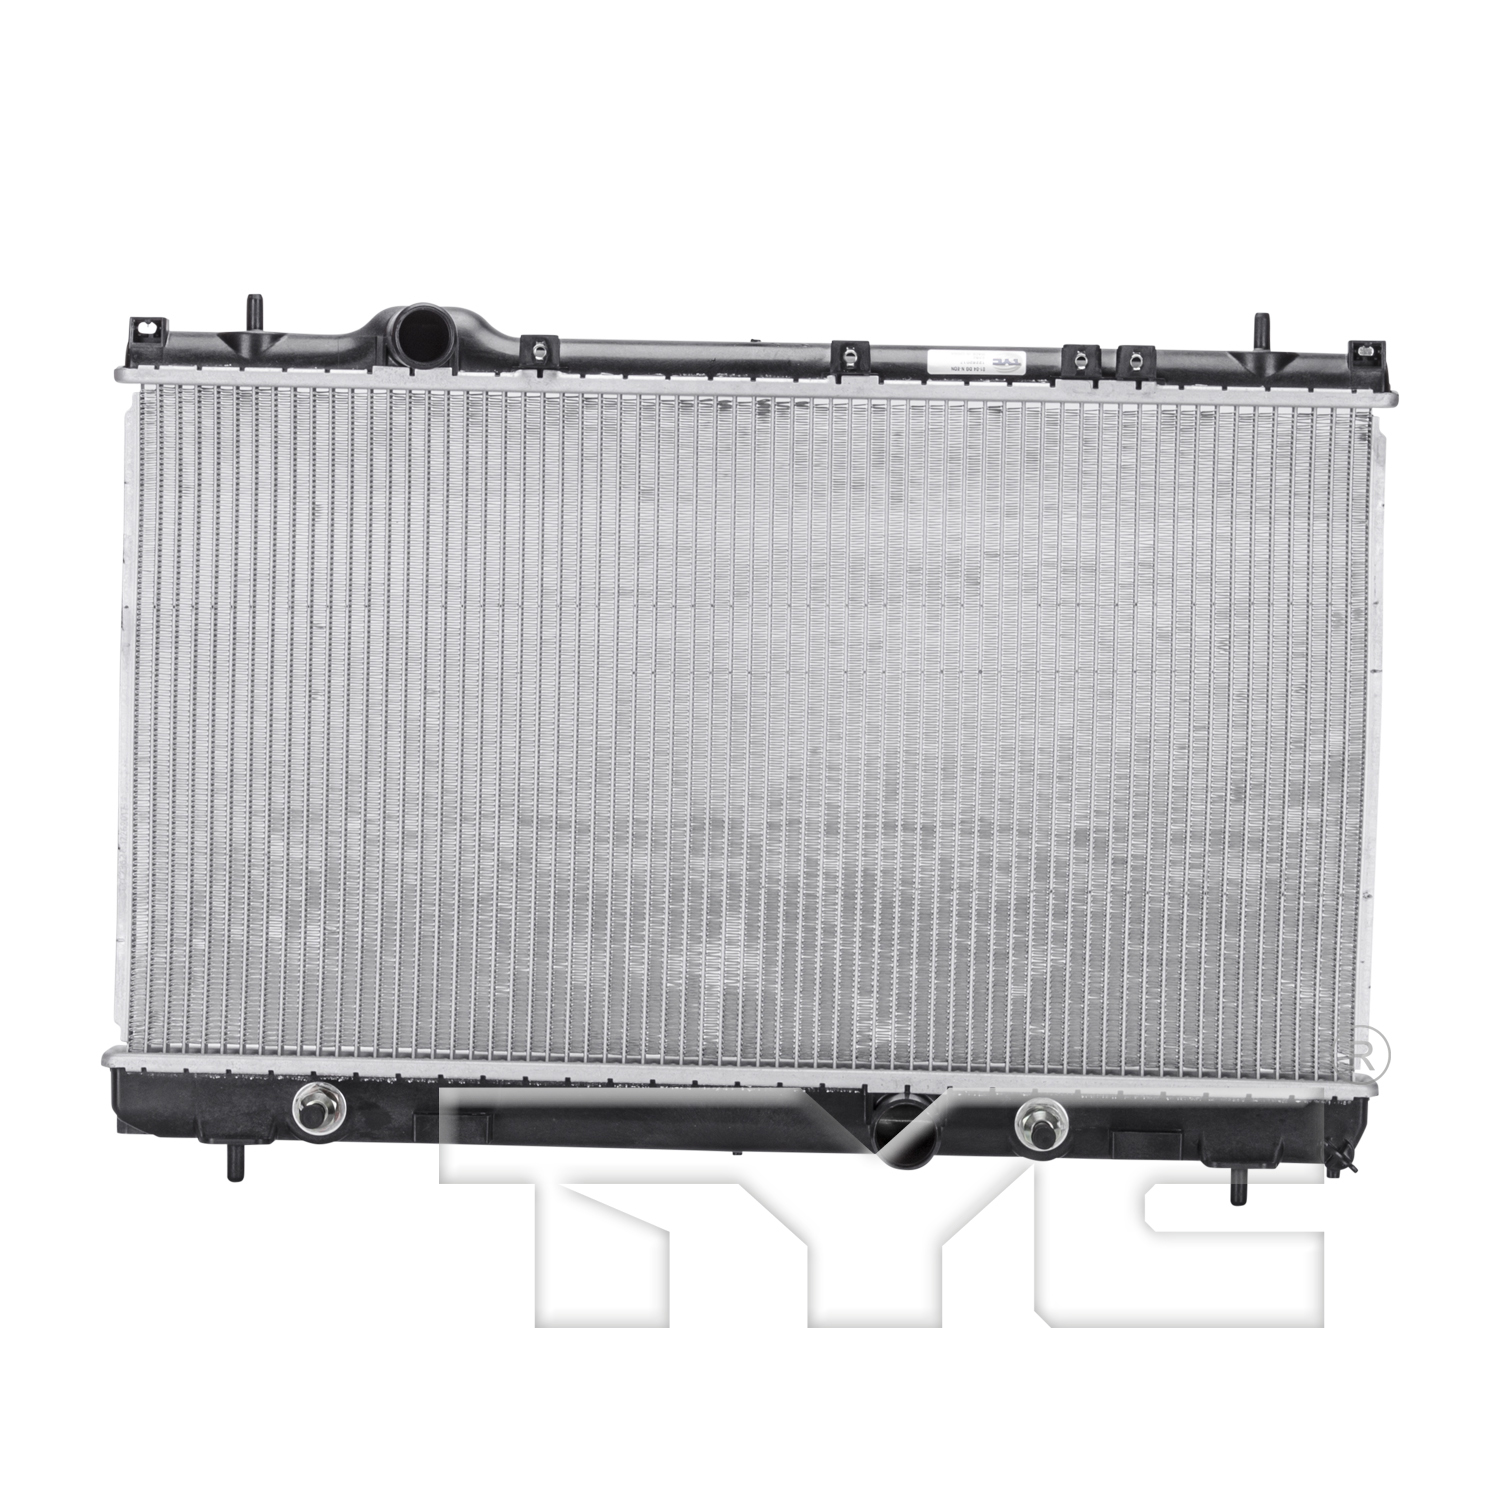 Aftermarket RADIATORS for DODGE - NEON, NEON,00-01,Radiator assembly